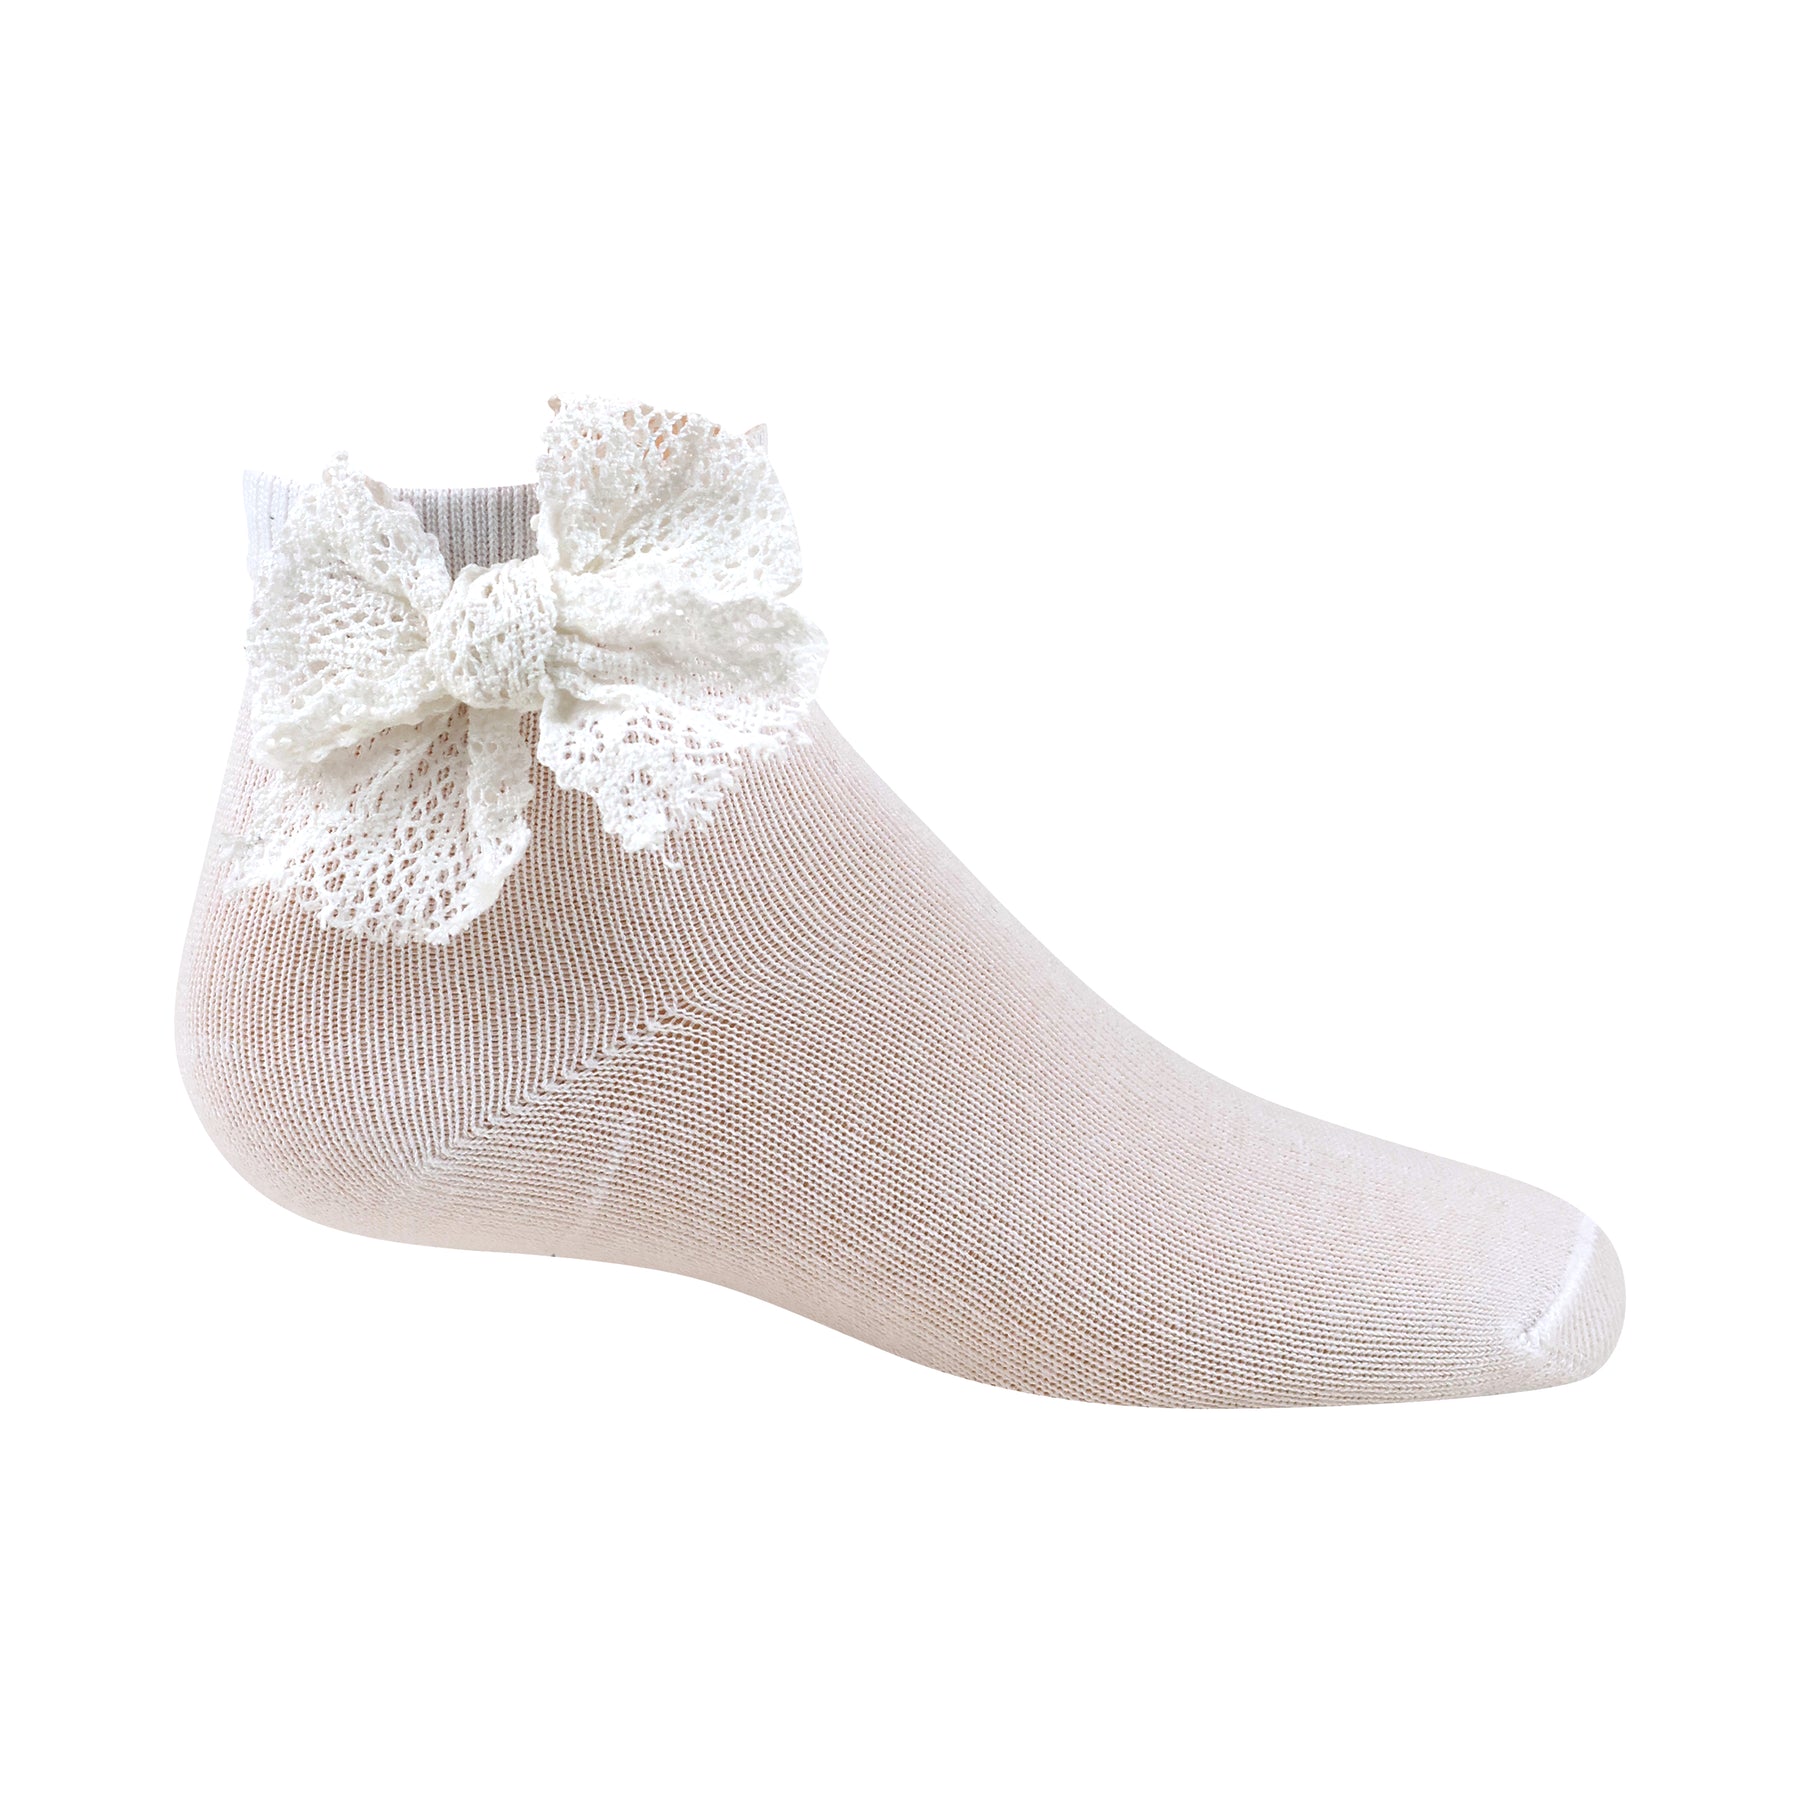 Lace Bow Ankle